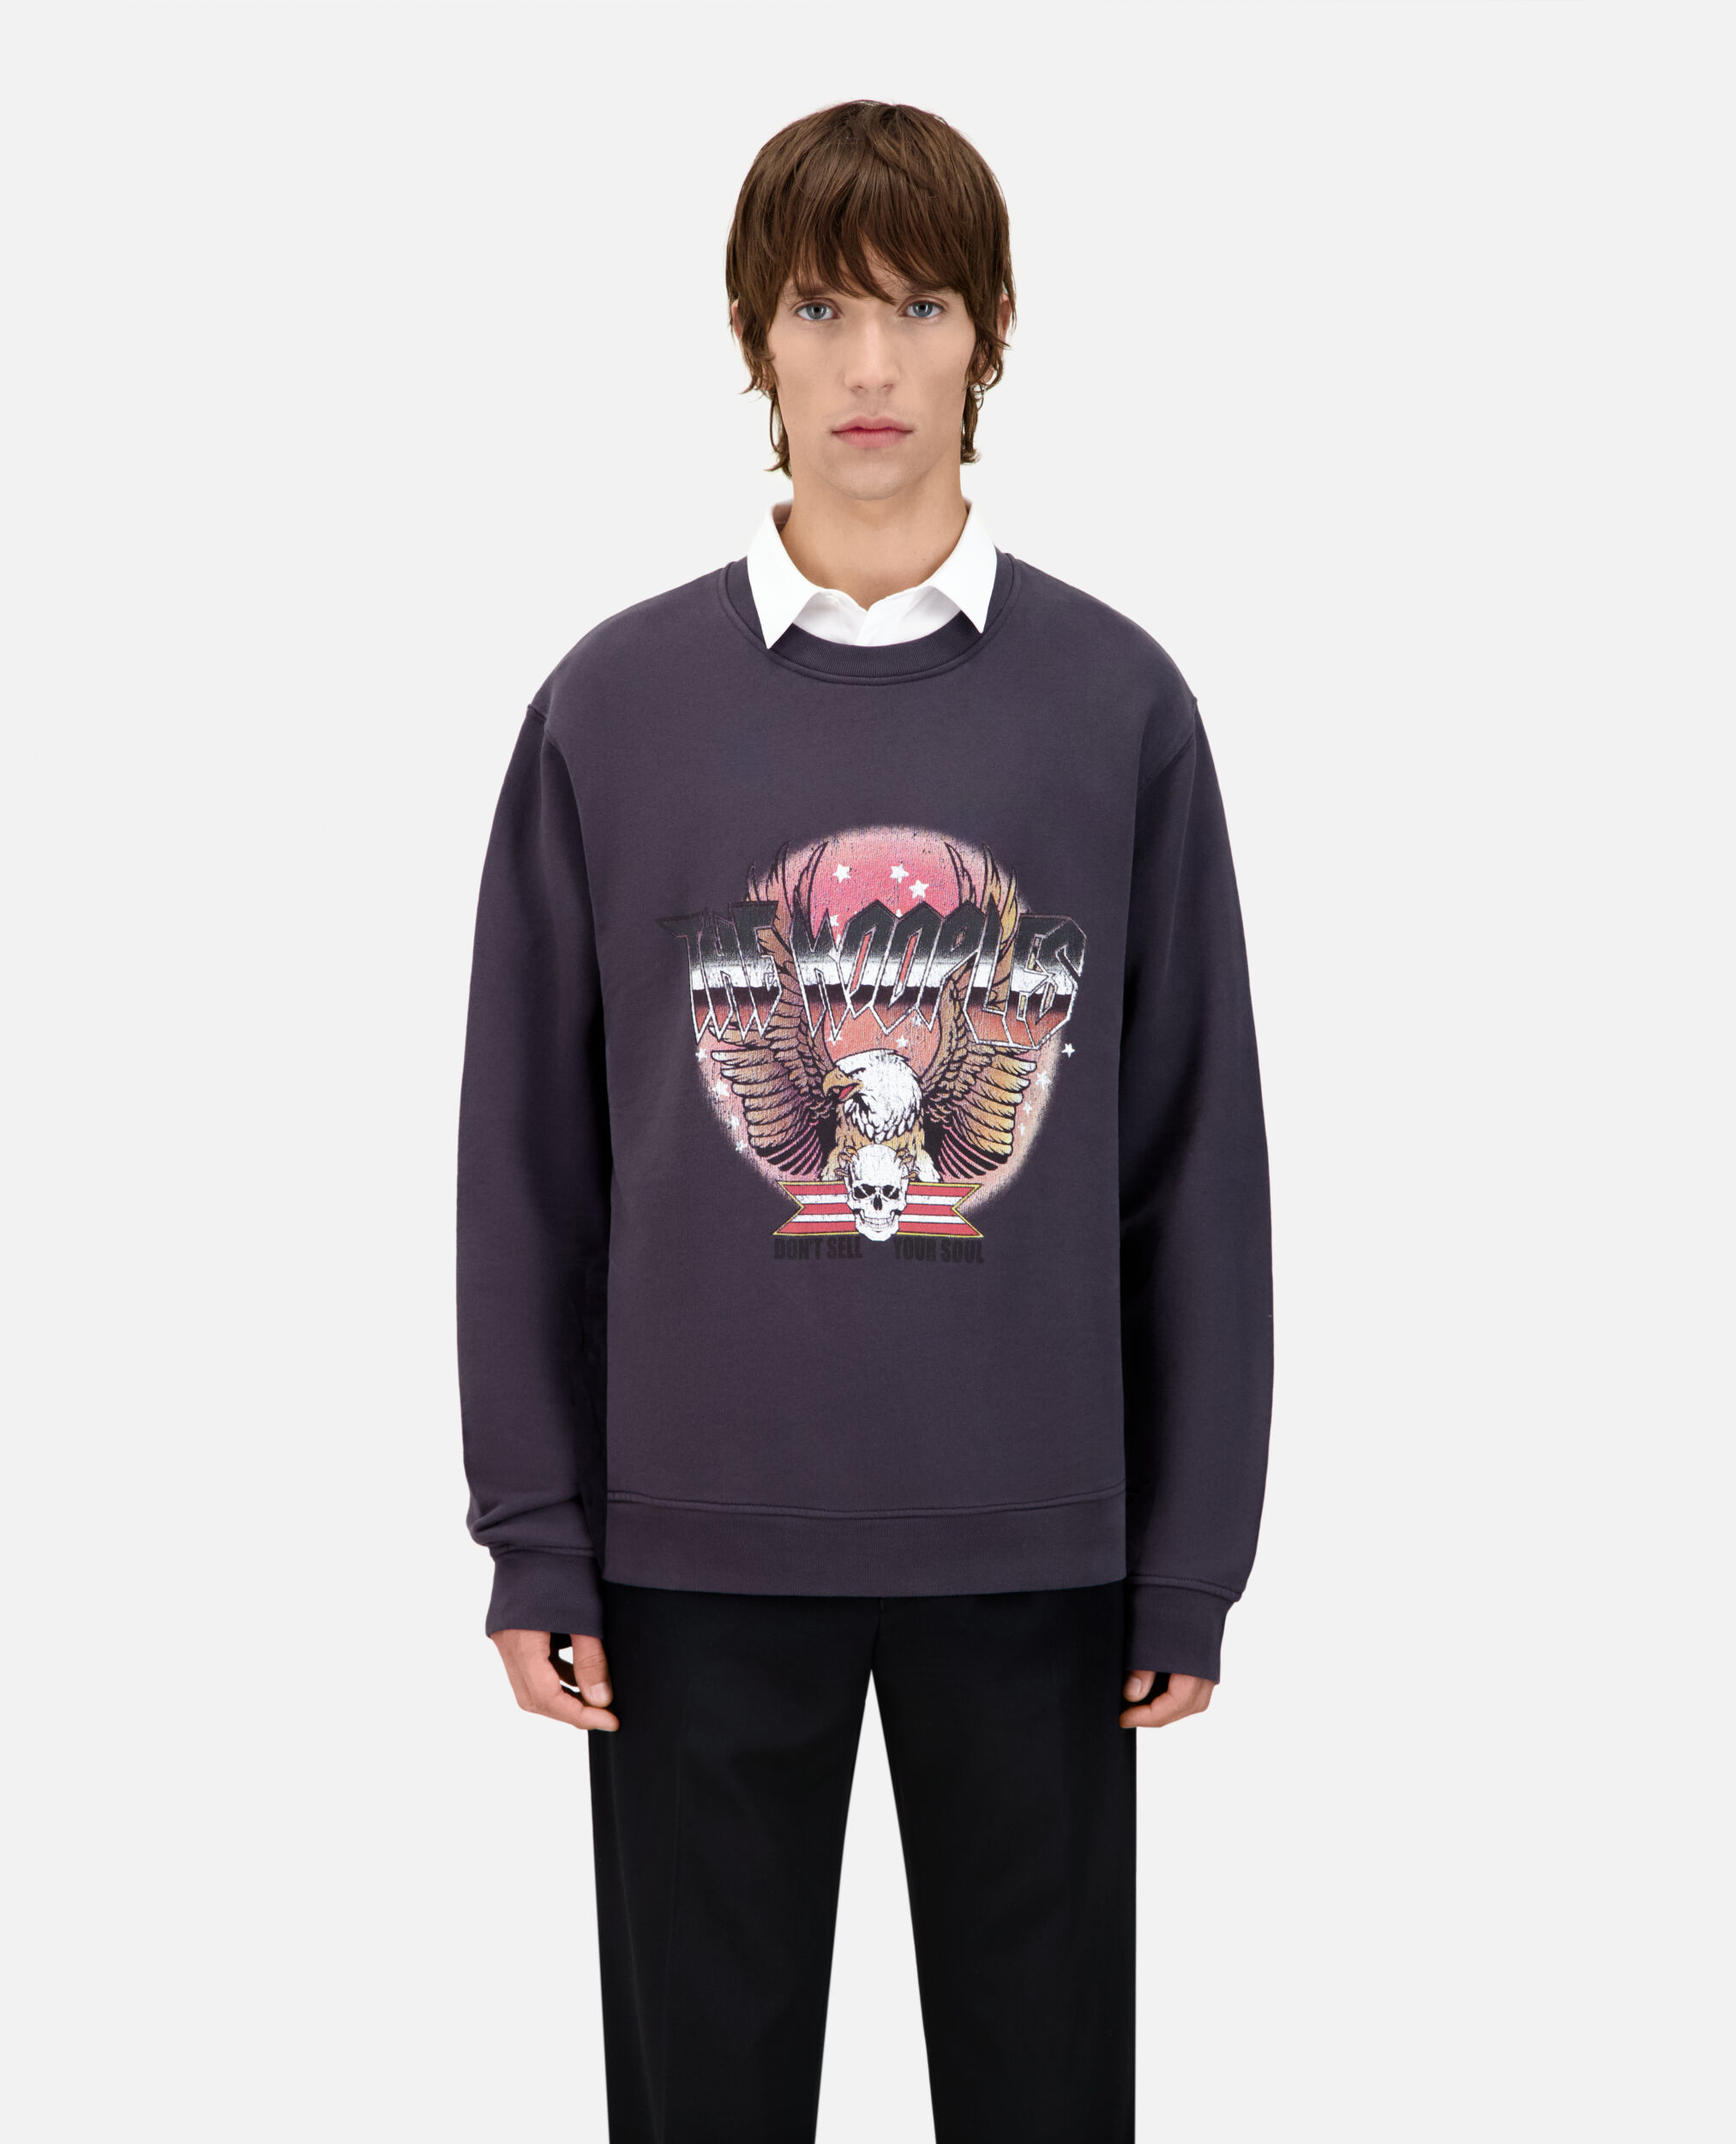 Carbon gray sweatshirt with Rock eagle serigraphy, CARBONE, hi-res image number null